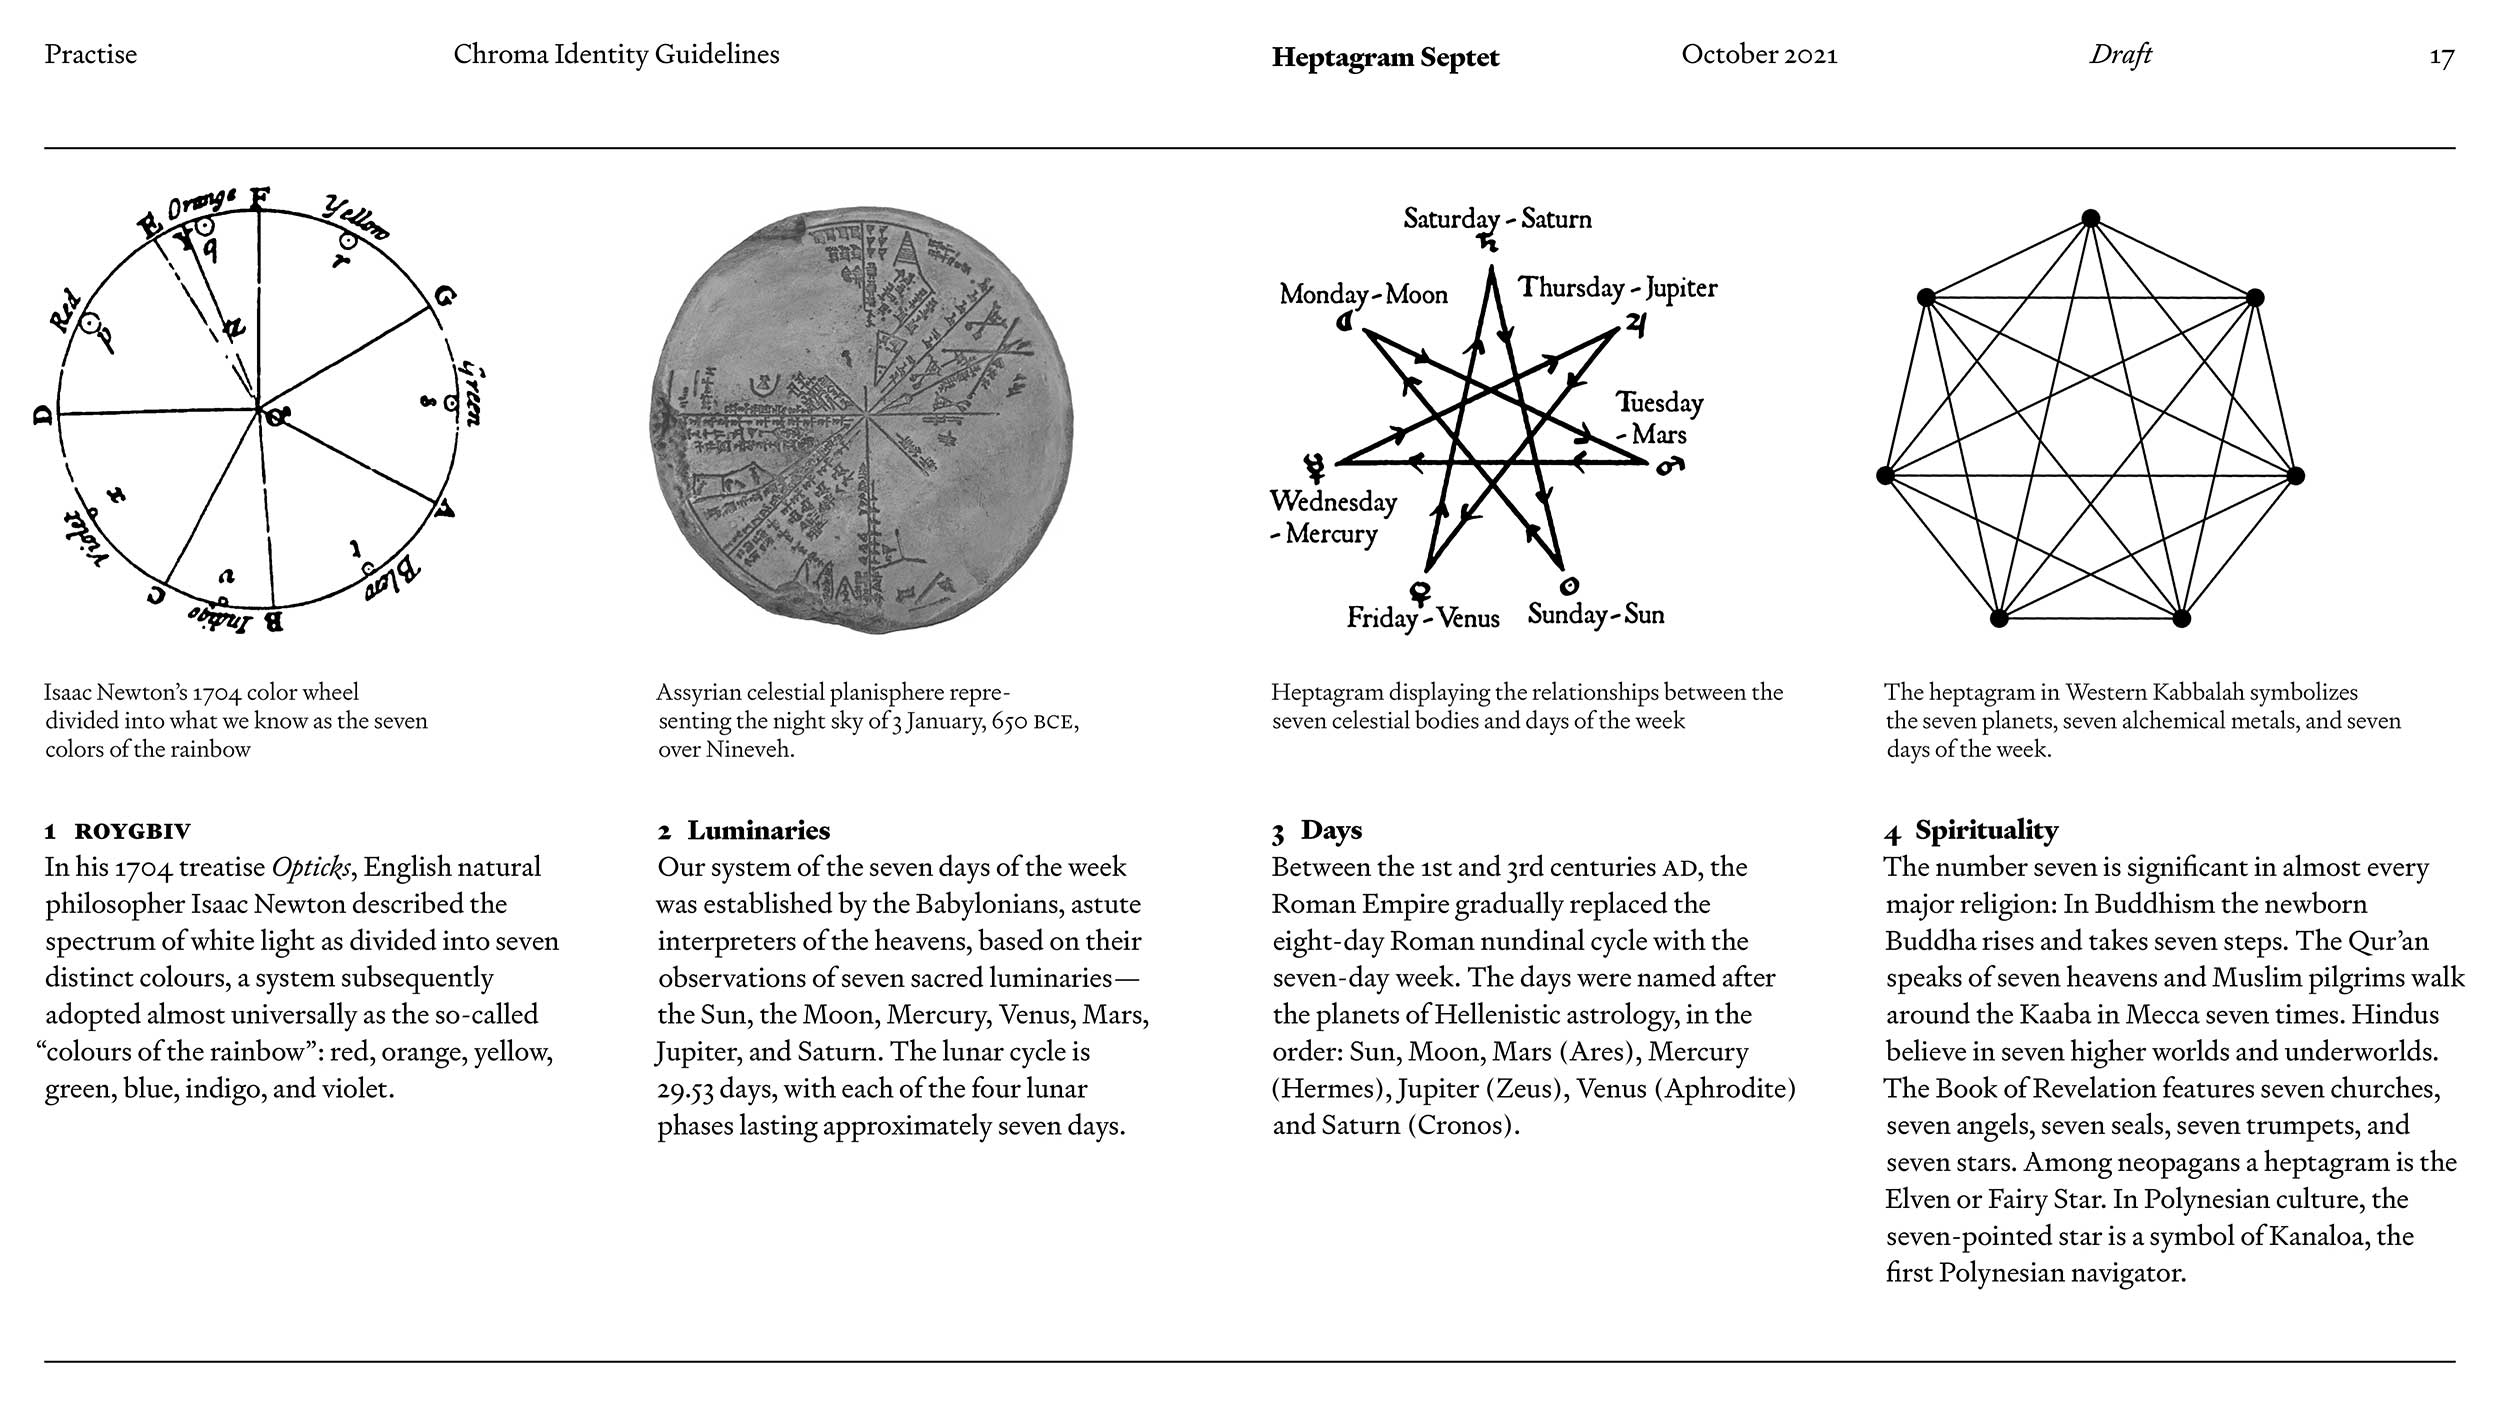 A page from the Chroma identity guidelines document shows four different heptagrams (7-pointed stars), from color to planetary to spiritual